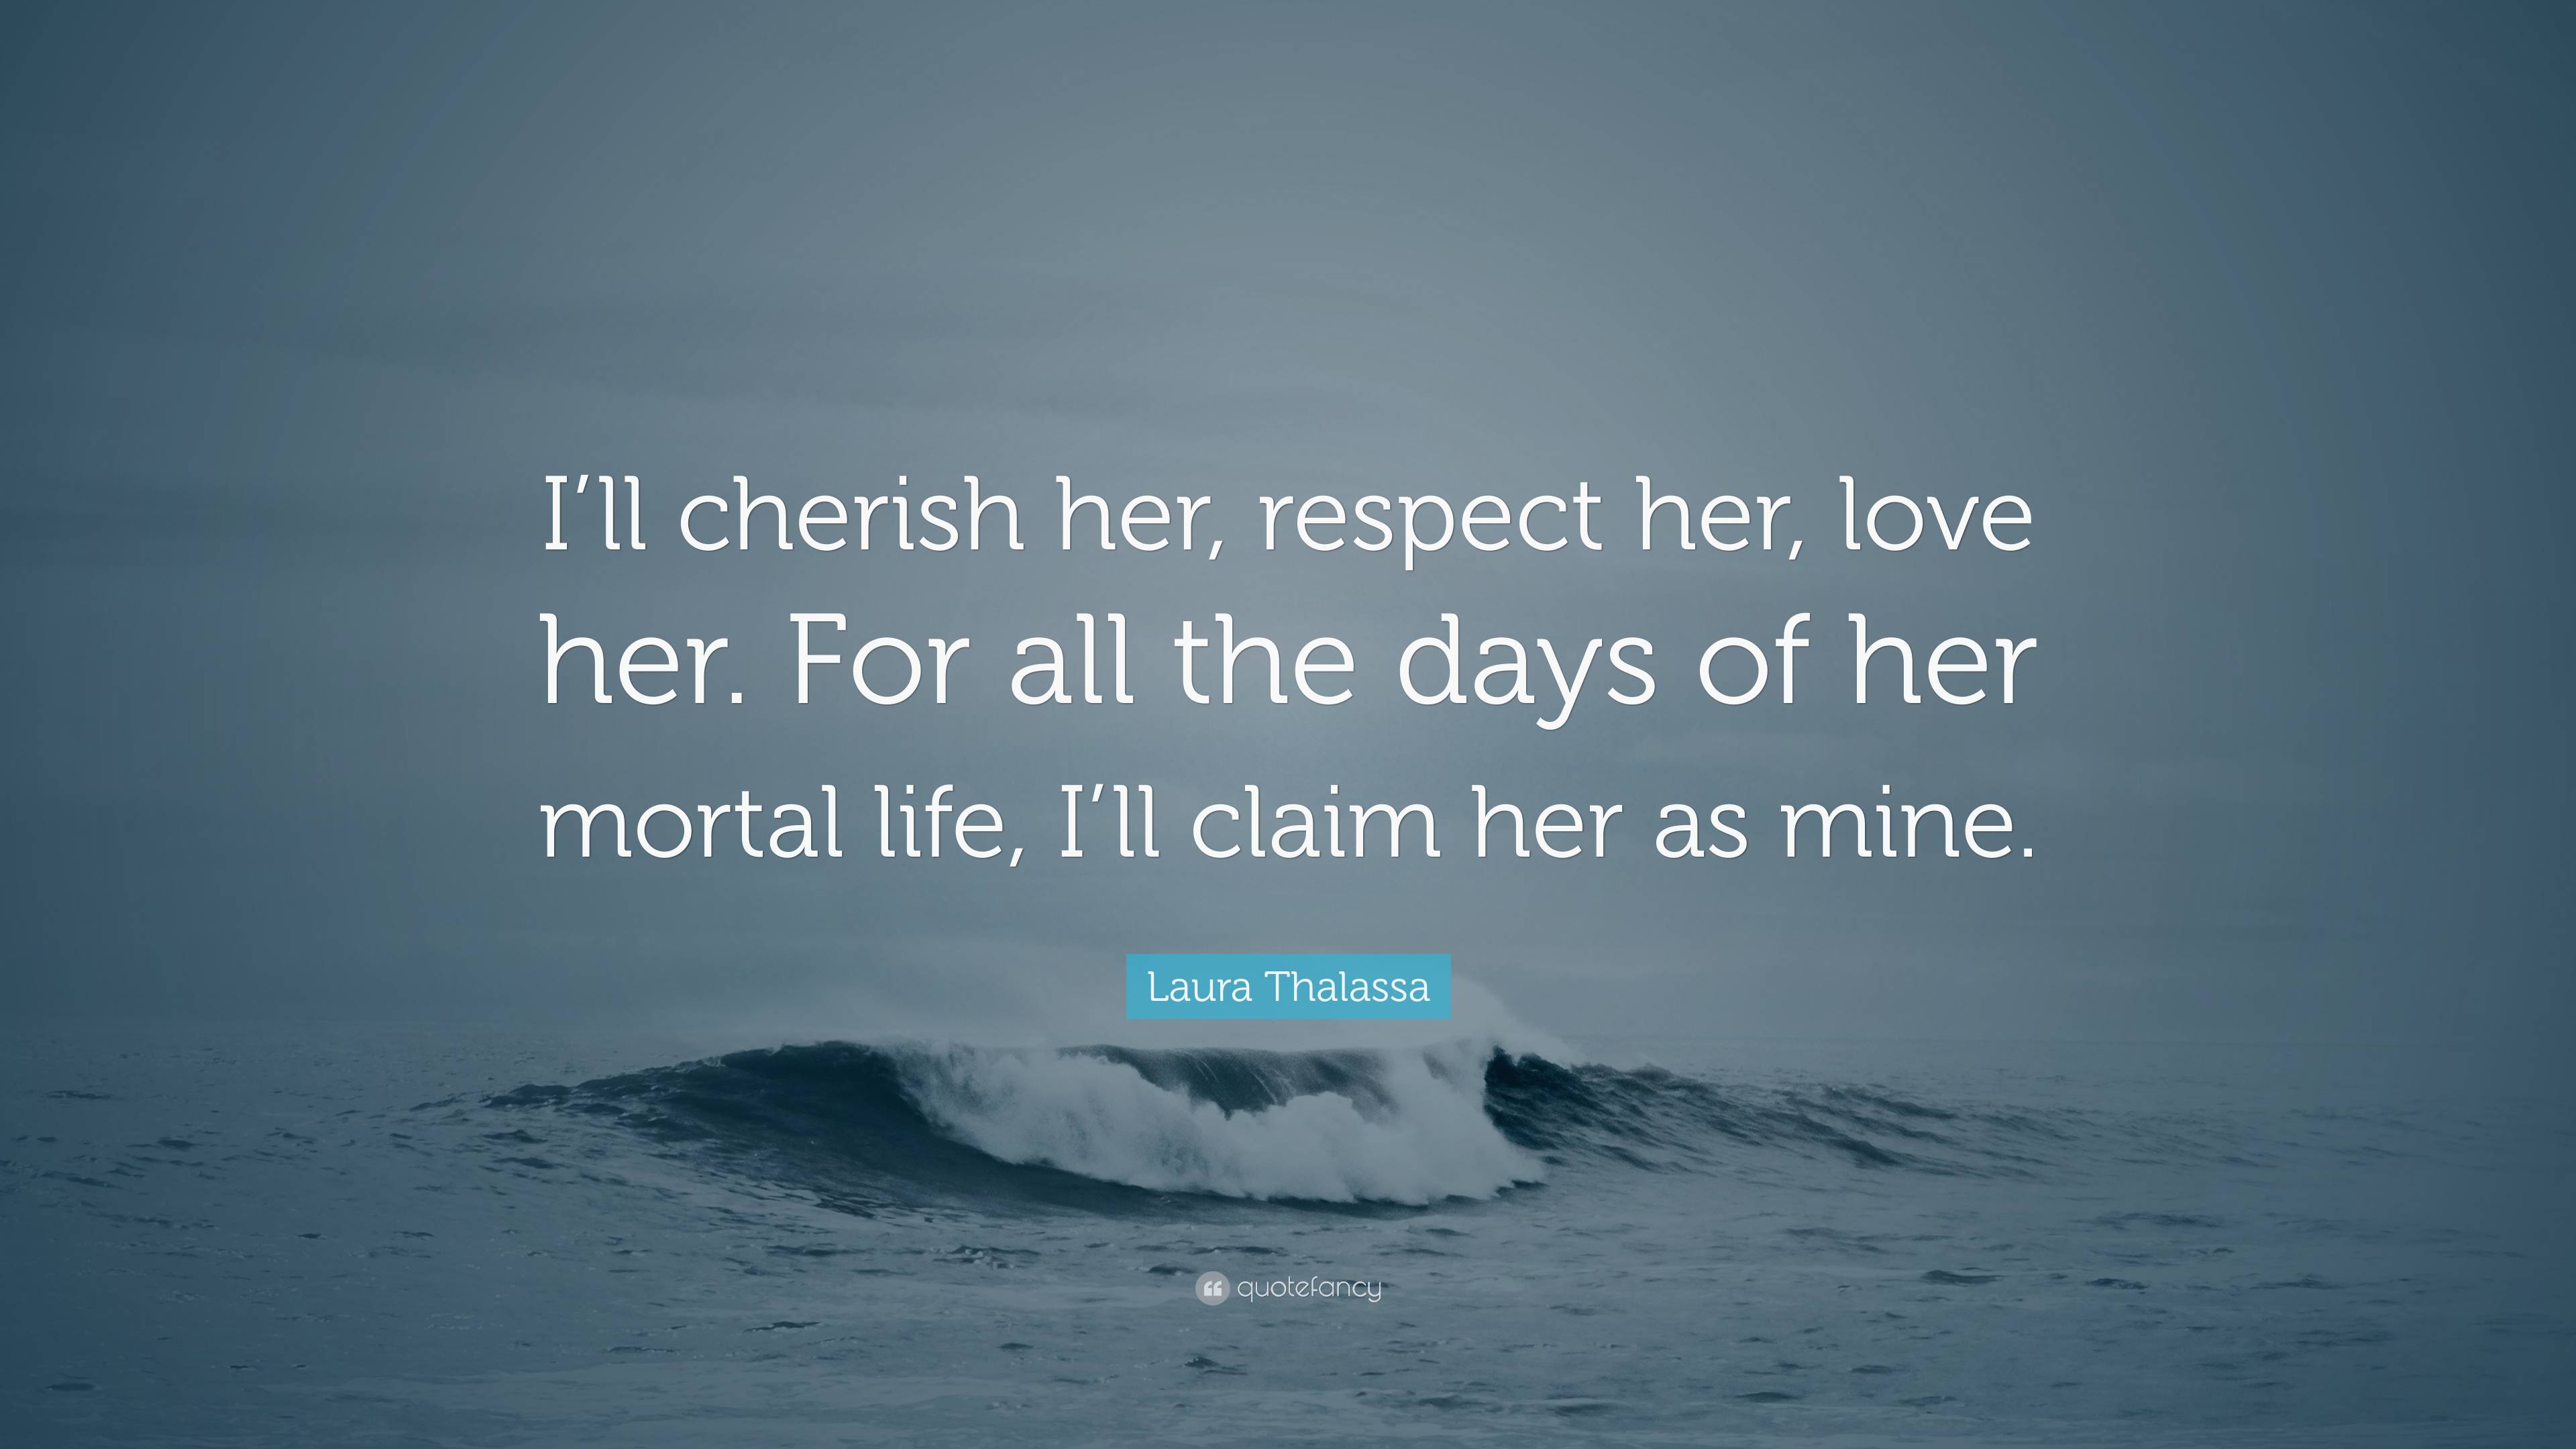 Laura Thalassa Quote: “I'll cherish her, respect her, love her. For all the  days of